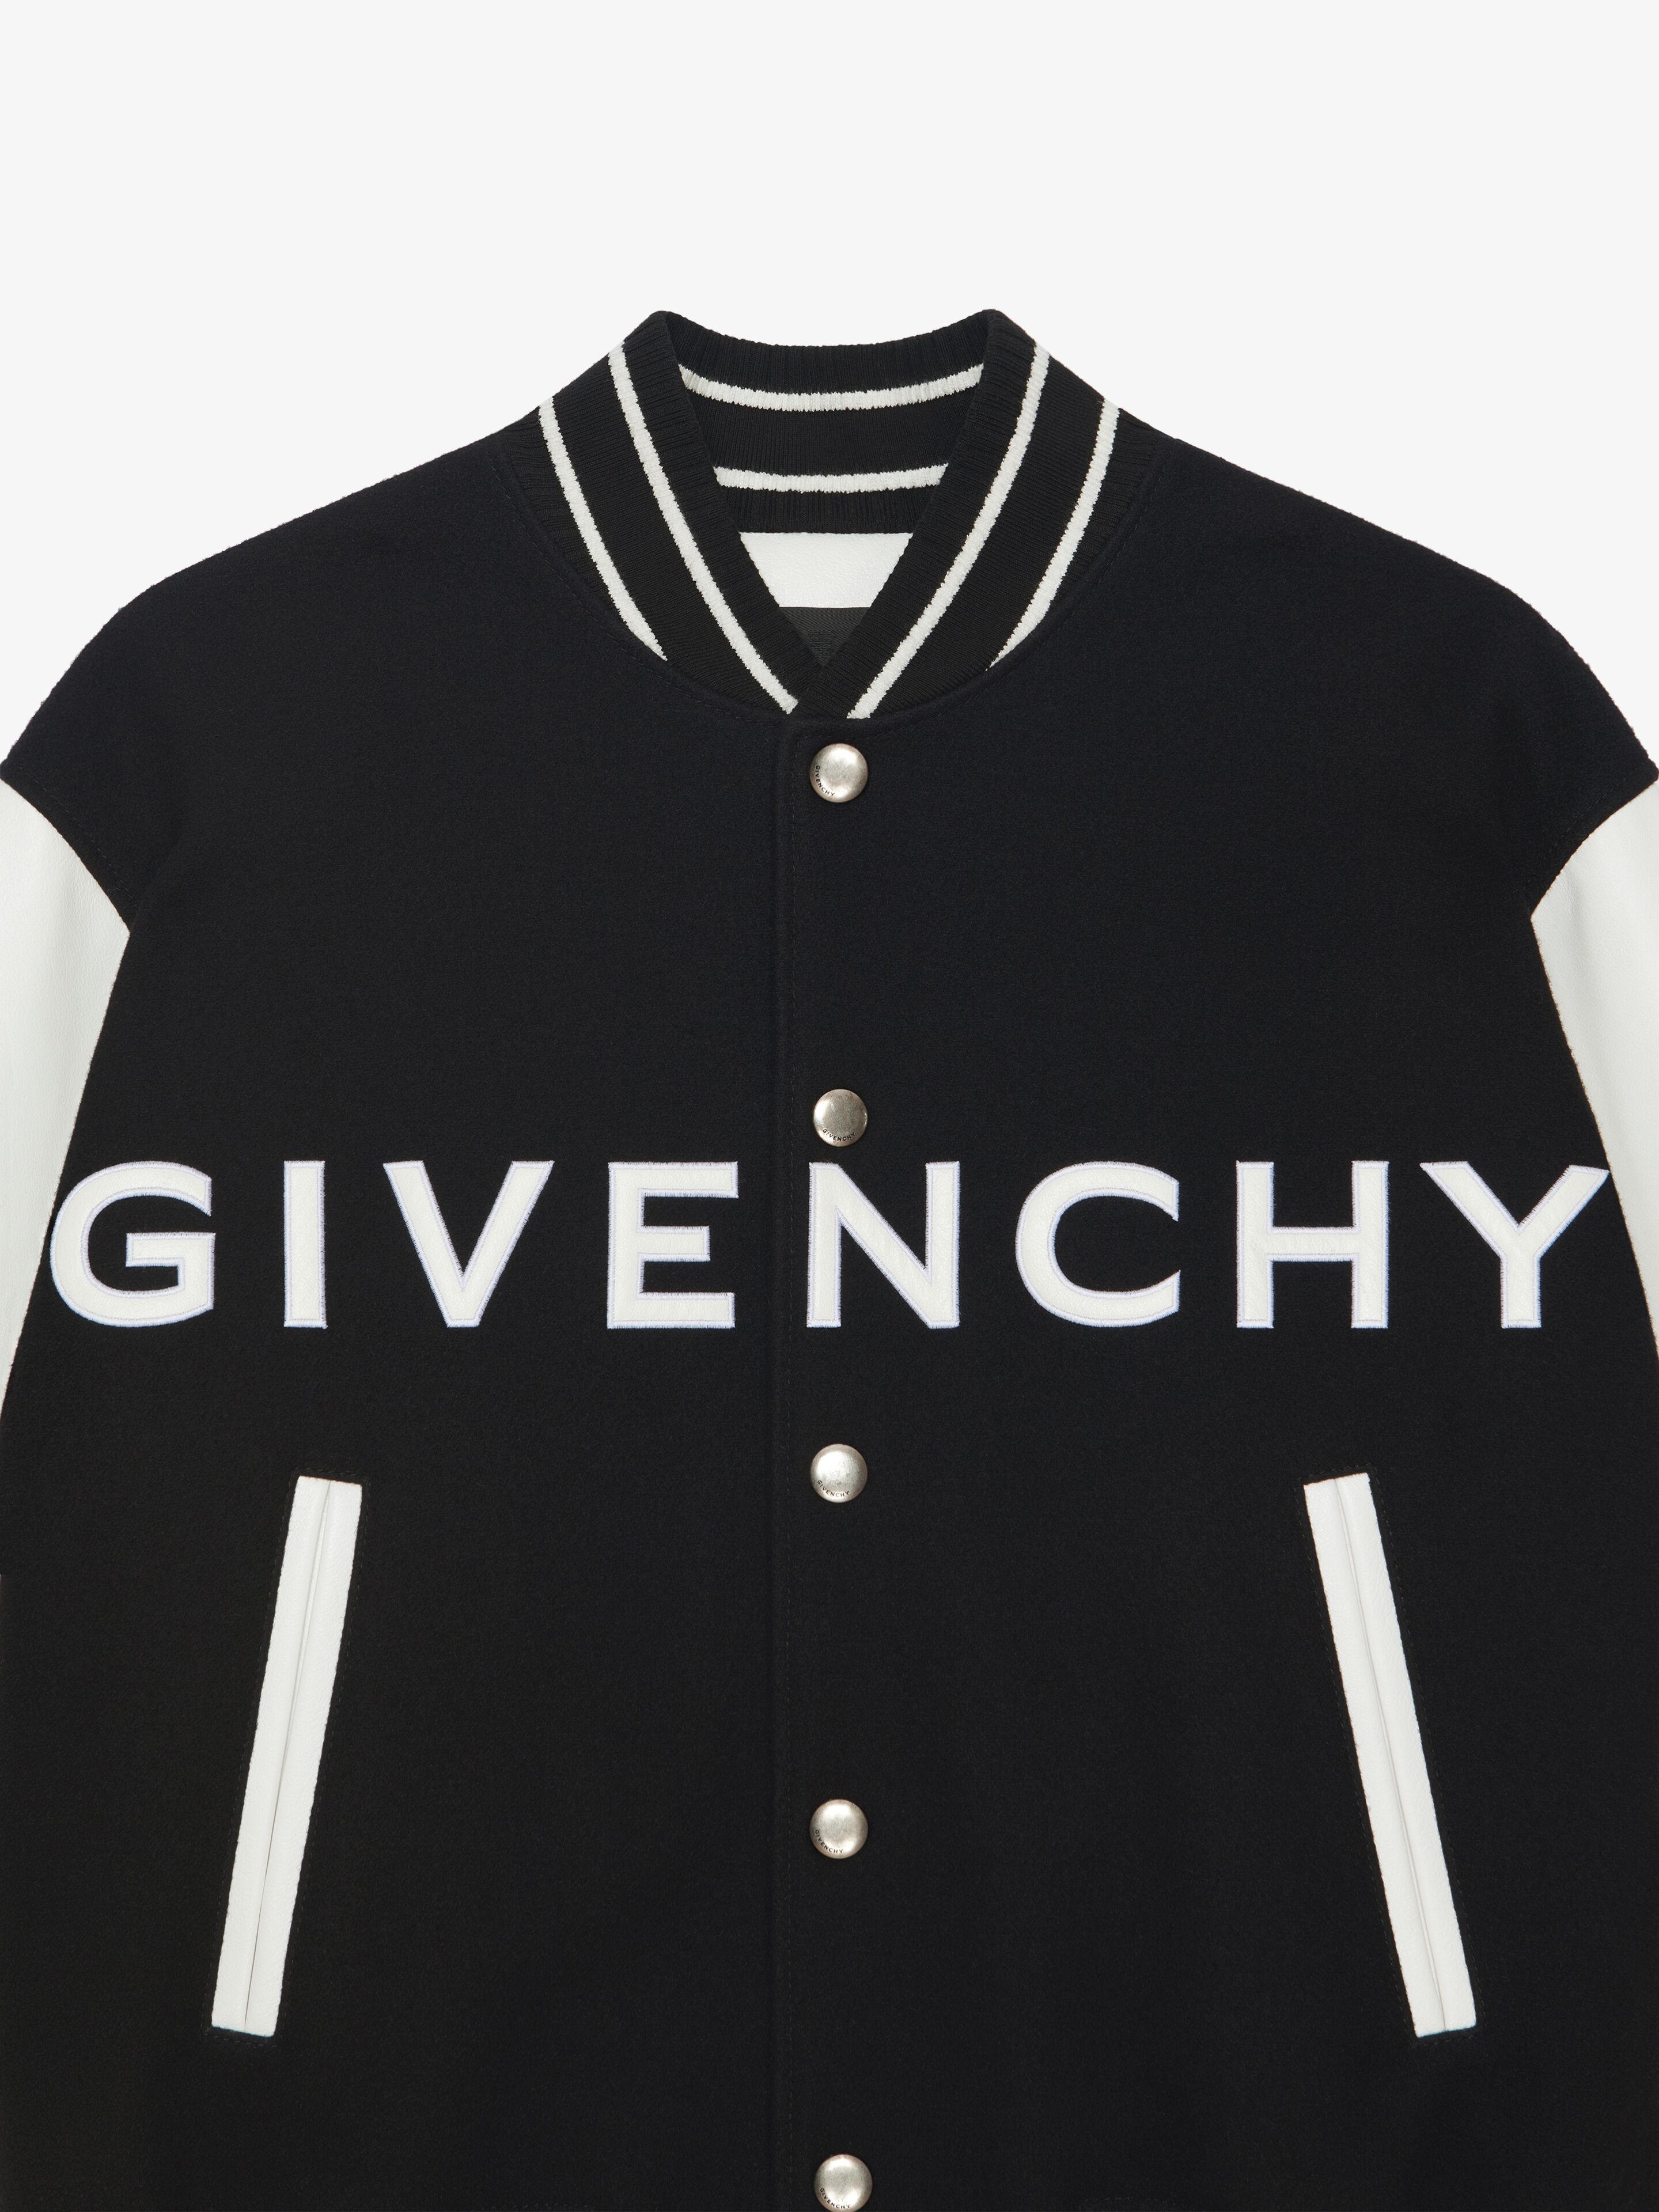 GIVENCHY VARSITY JACKET IN WOOL AND LEATHER - 5